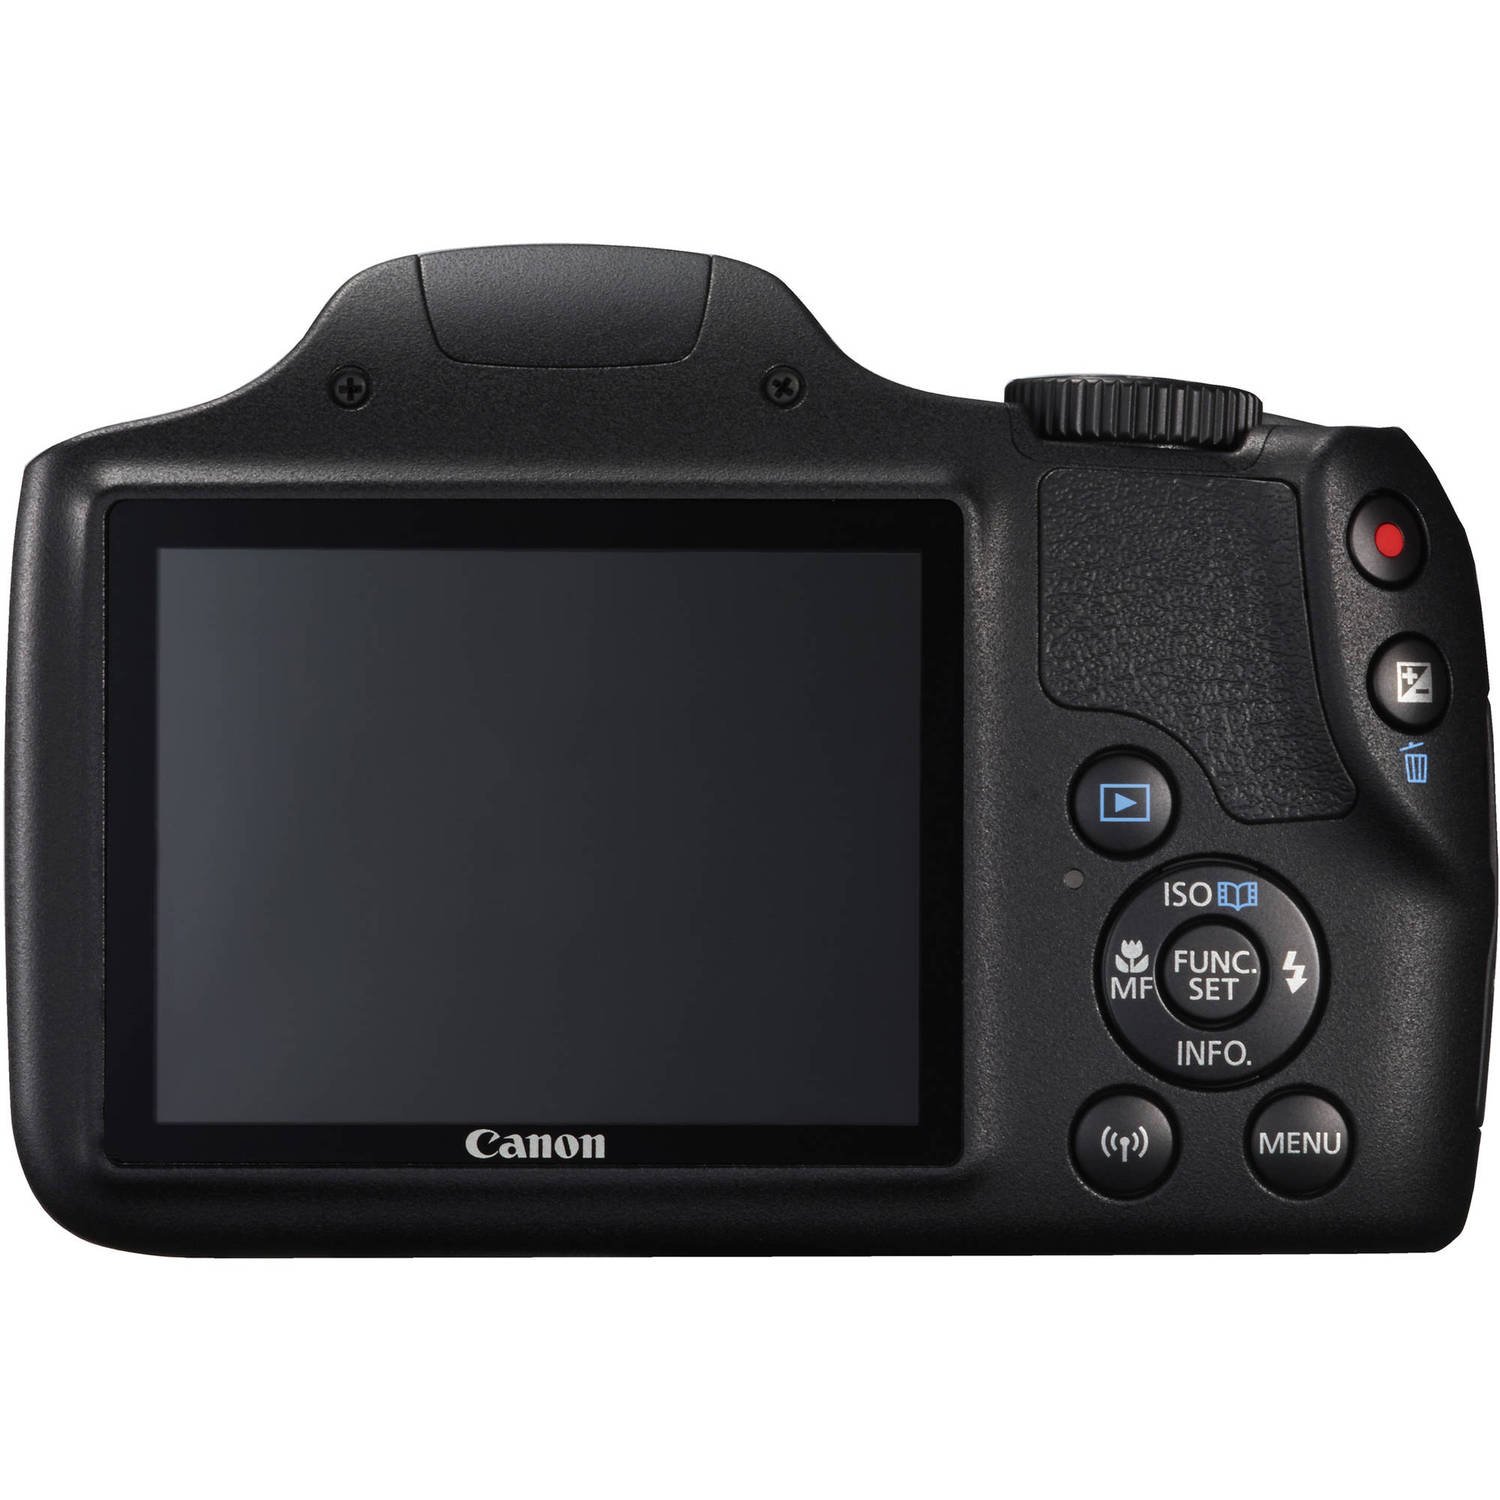 Canon HS Digital Point and Shoot 20MP Camera + Extra Battery + Digital Flash + Camera Case + 32GB Class 10 Memory Card - Intl Model - image 5 of 6